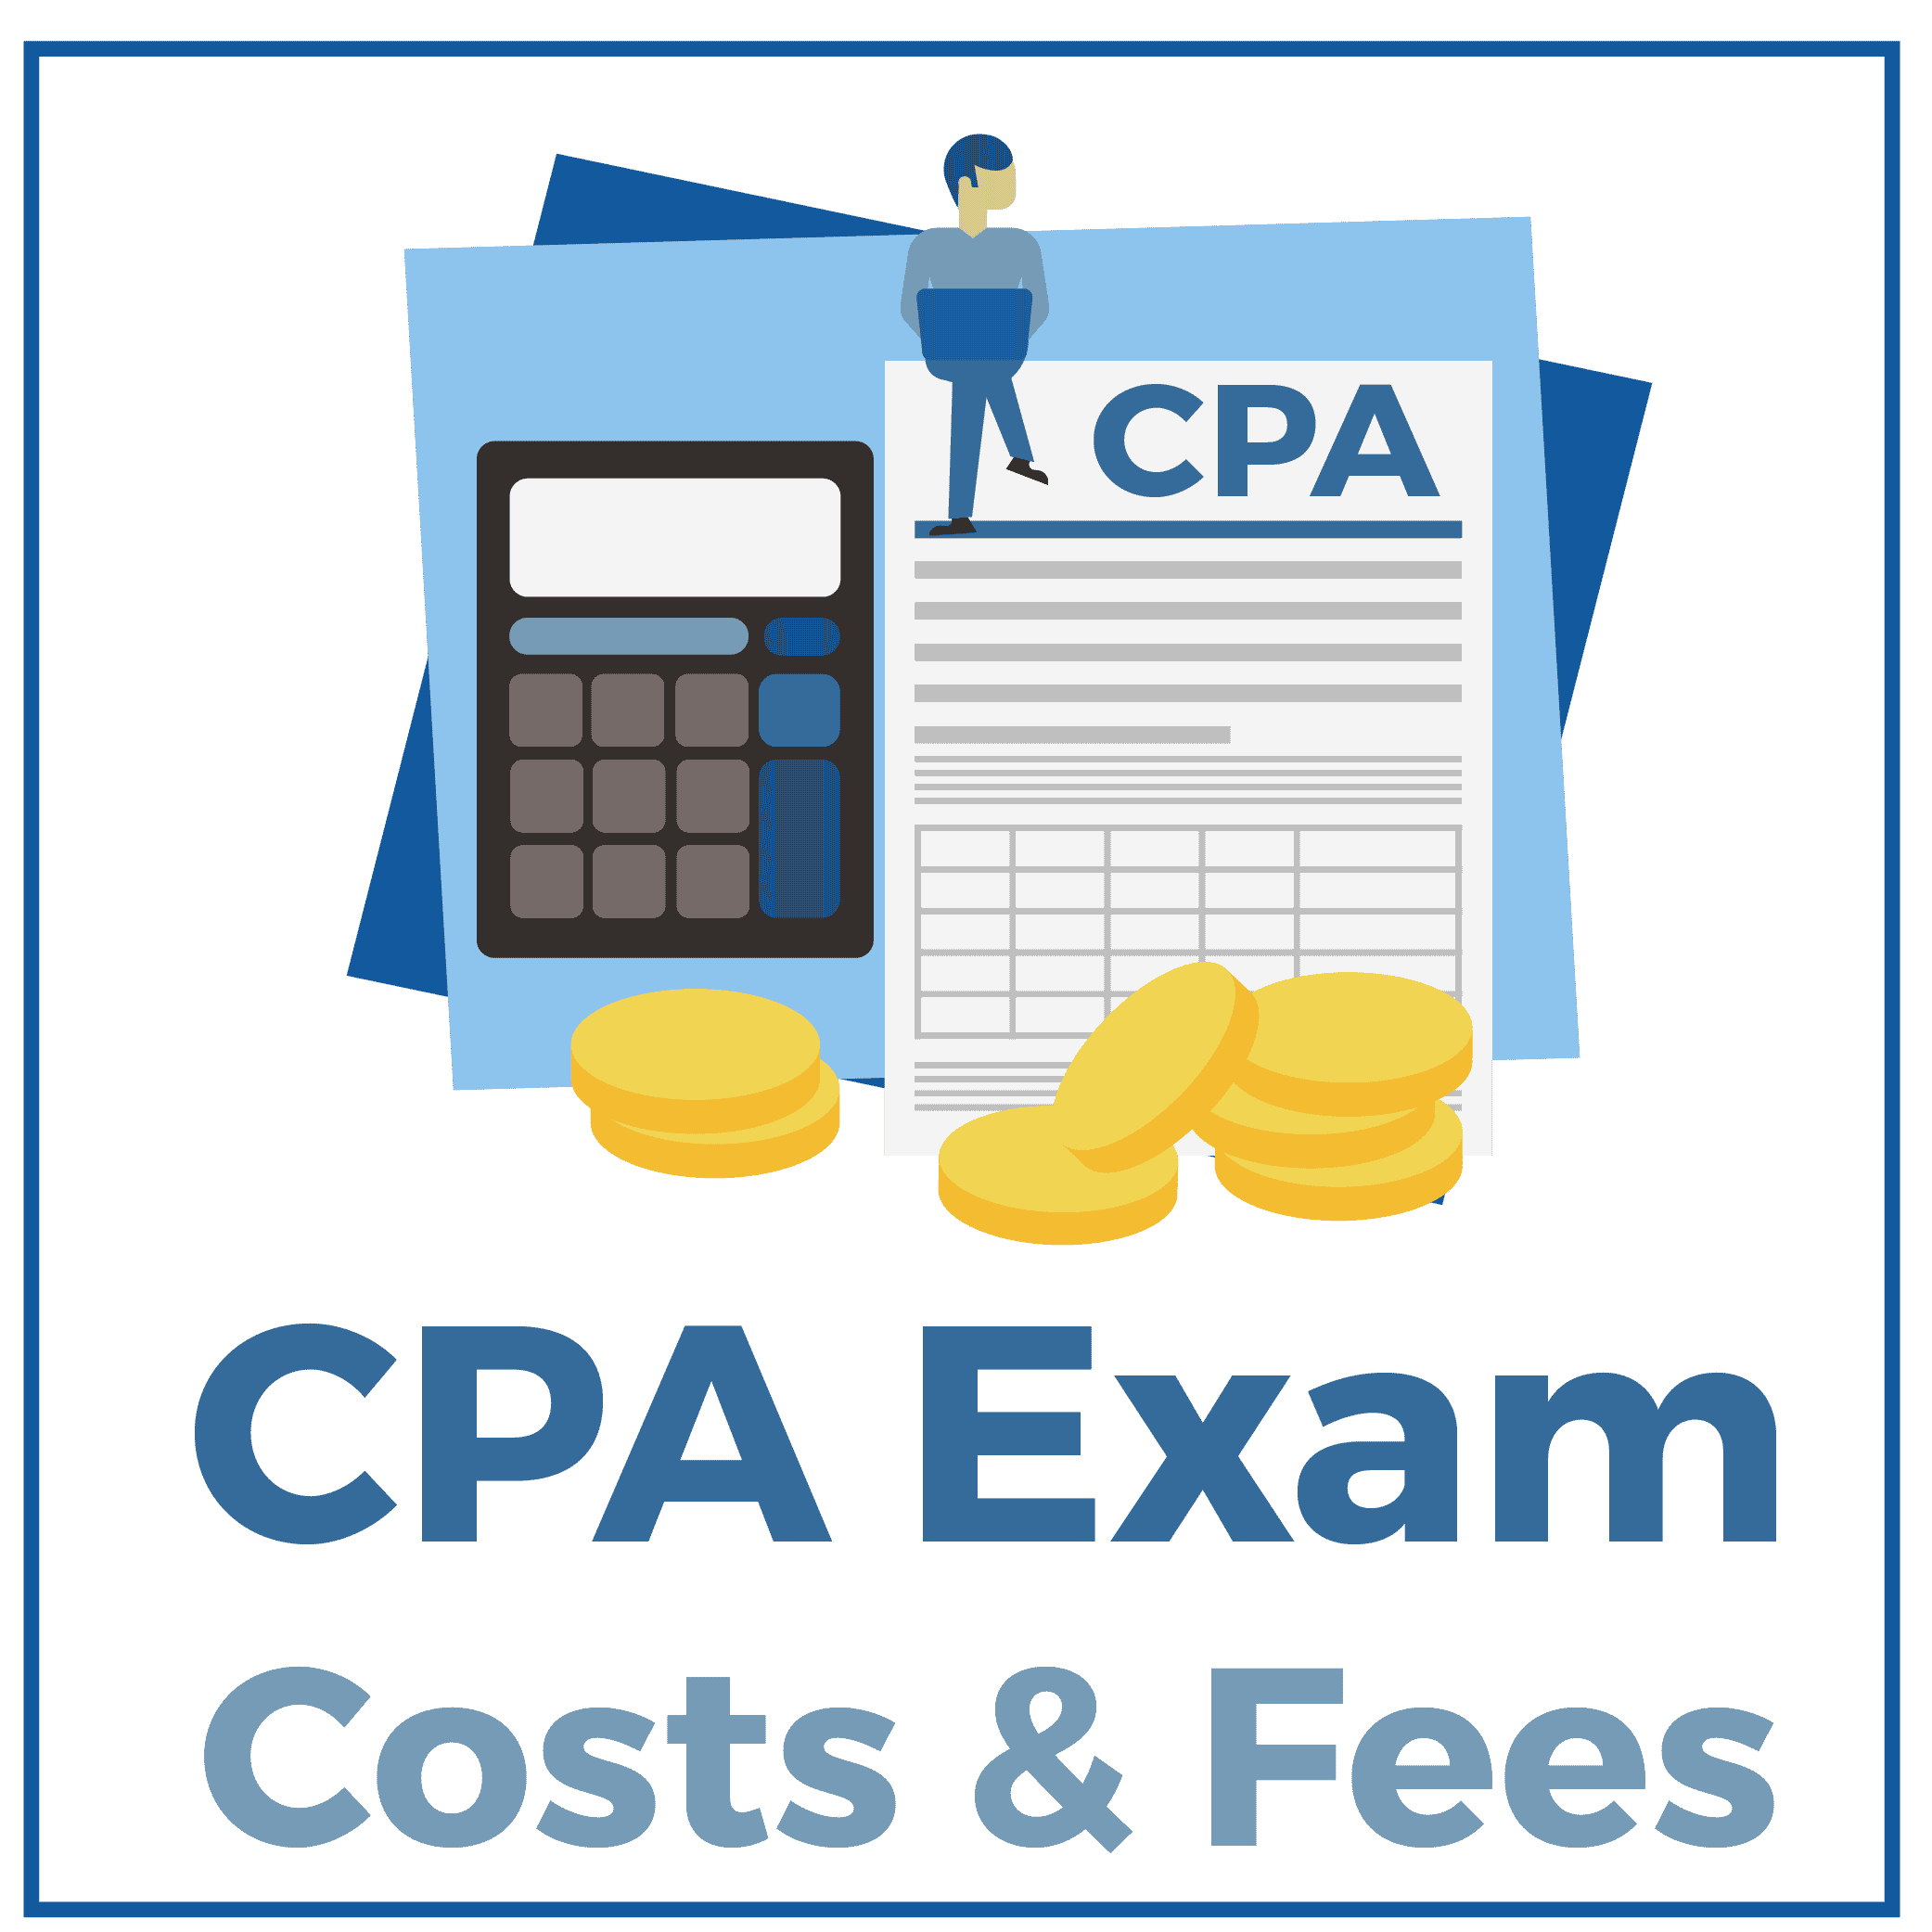 CPA Exam Costs & Fees